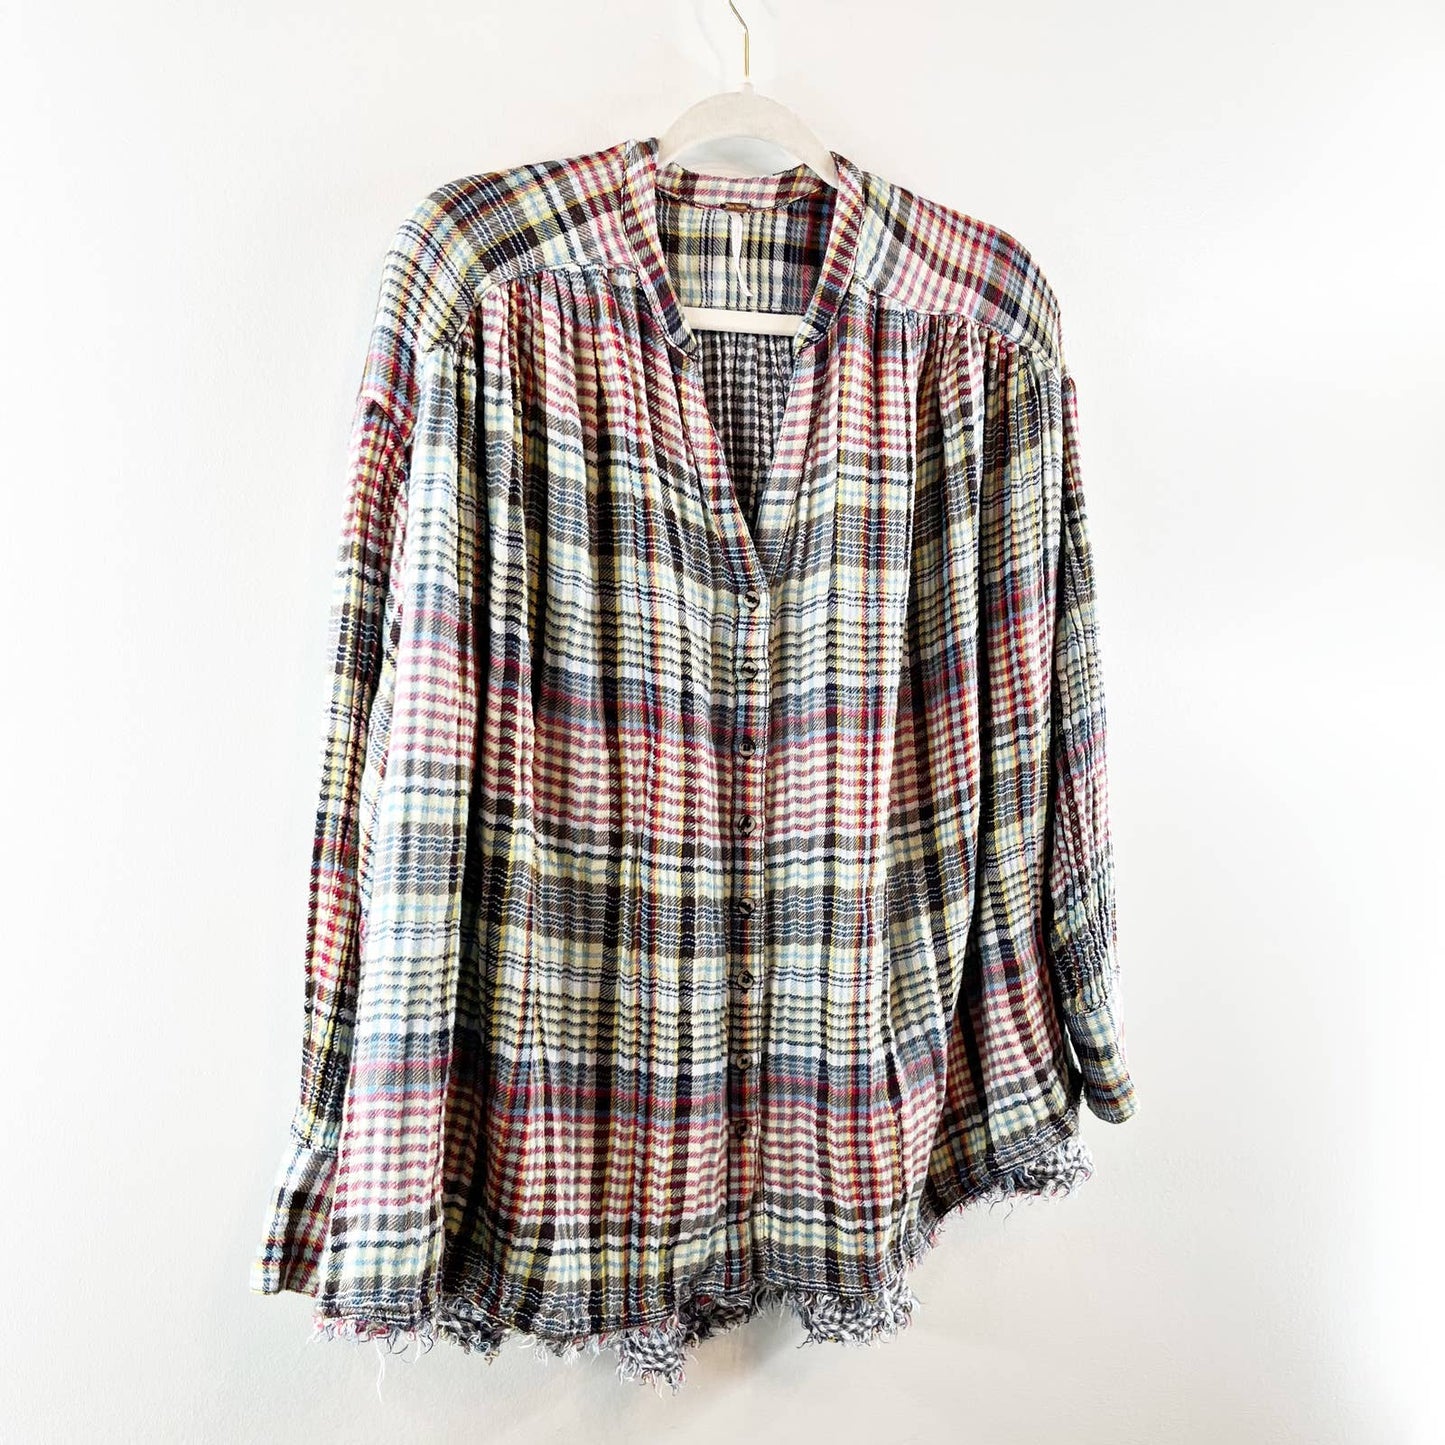 Free People Come On Over Plaid Oversized Flannel Top Shirt Pink Gray XS